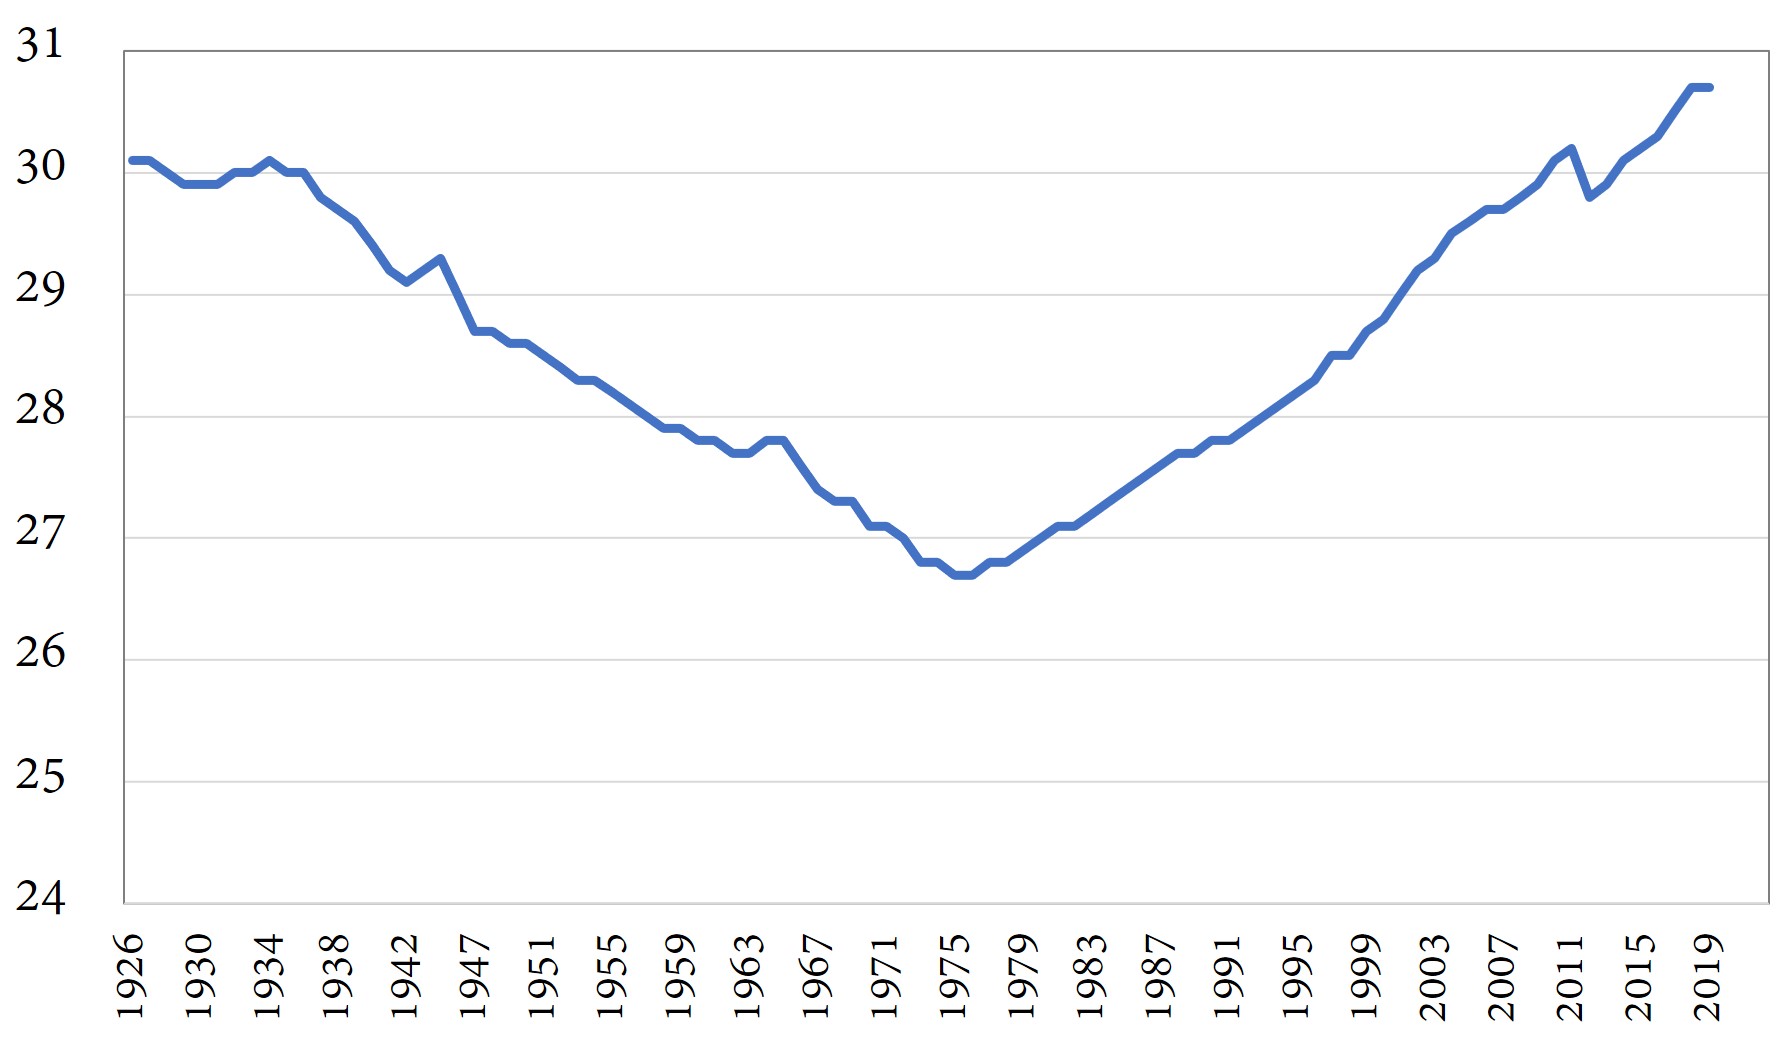 This graph shows that the average age of Canadian mothers (whether they are giving birth to their first child or to higher order children) declined fairly smoothly from 30 in 1938 to just under 27 in 1975. After 1975 it rose steadily and reached 30 again in about 2011. In 2019 it was close to 31 years of age.